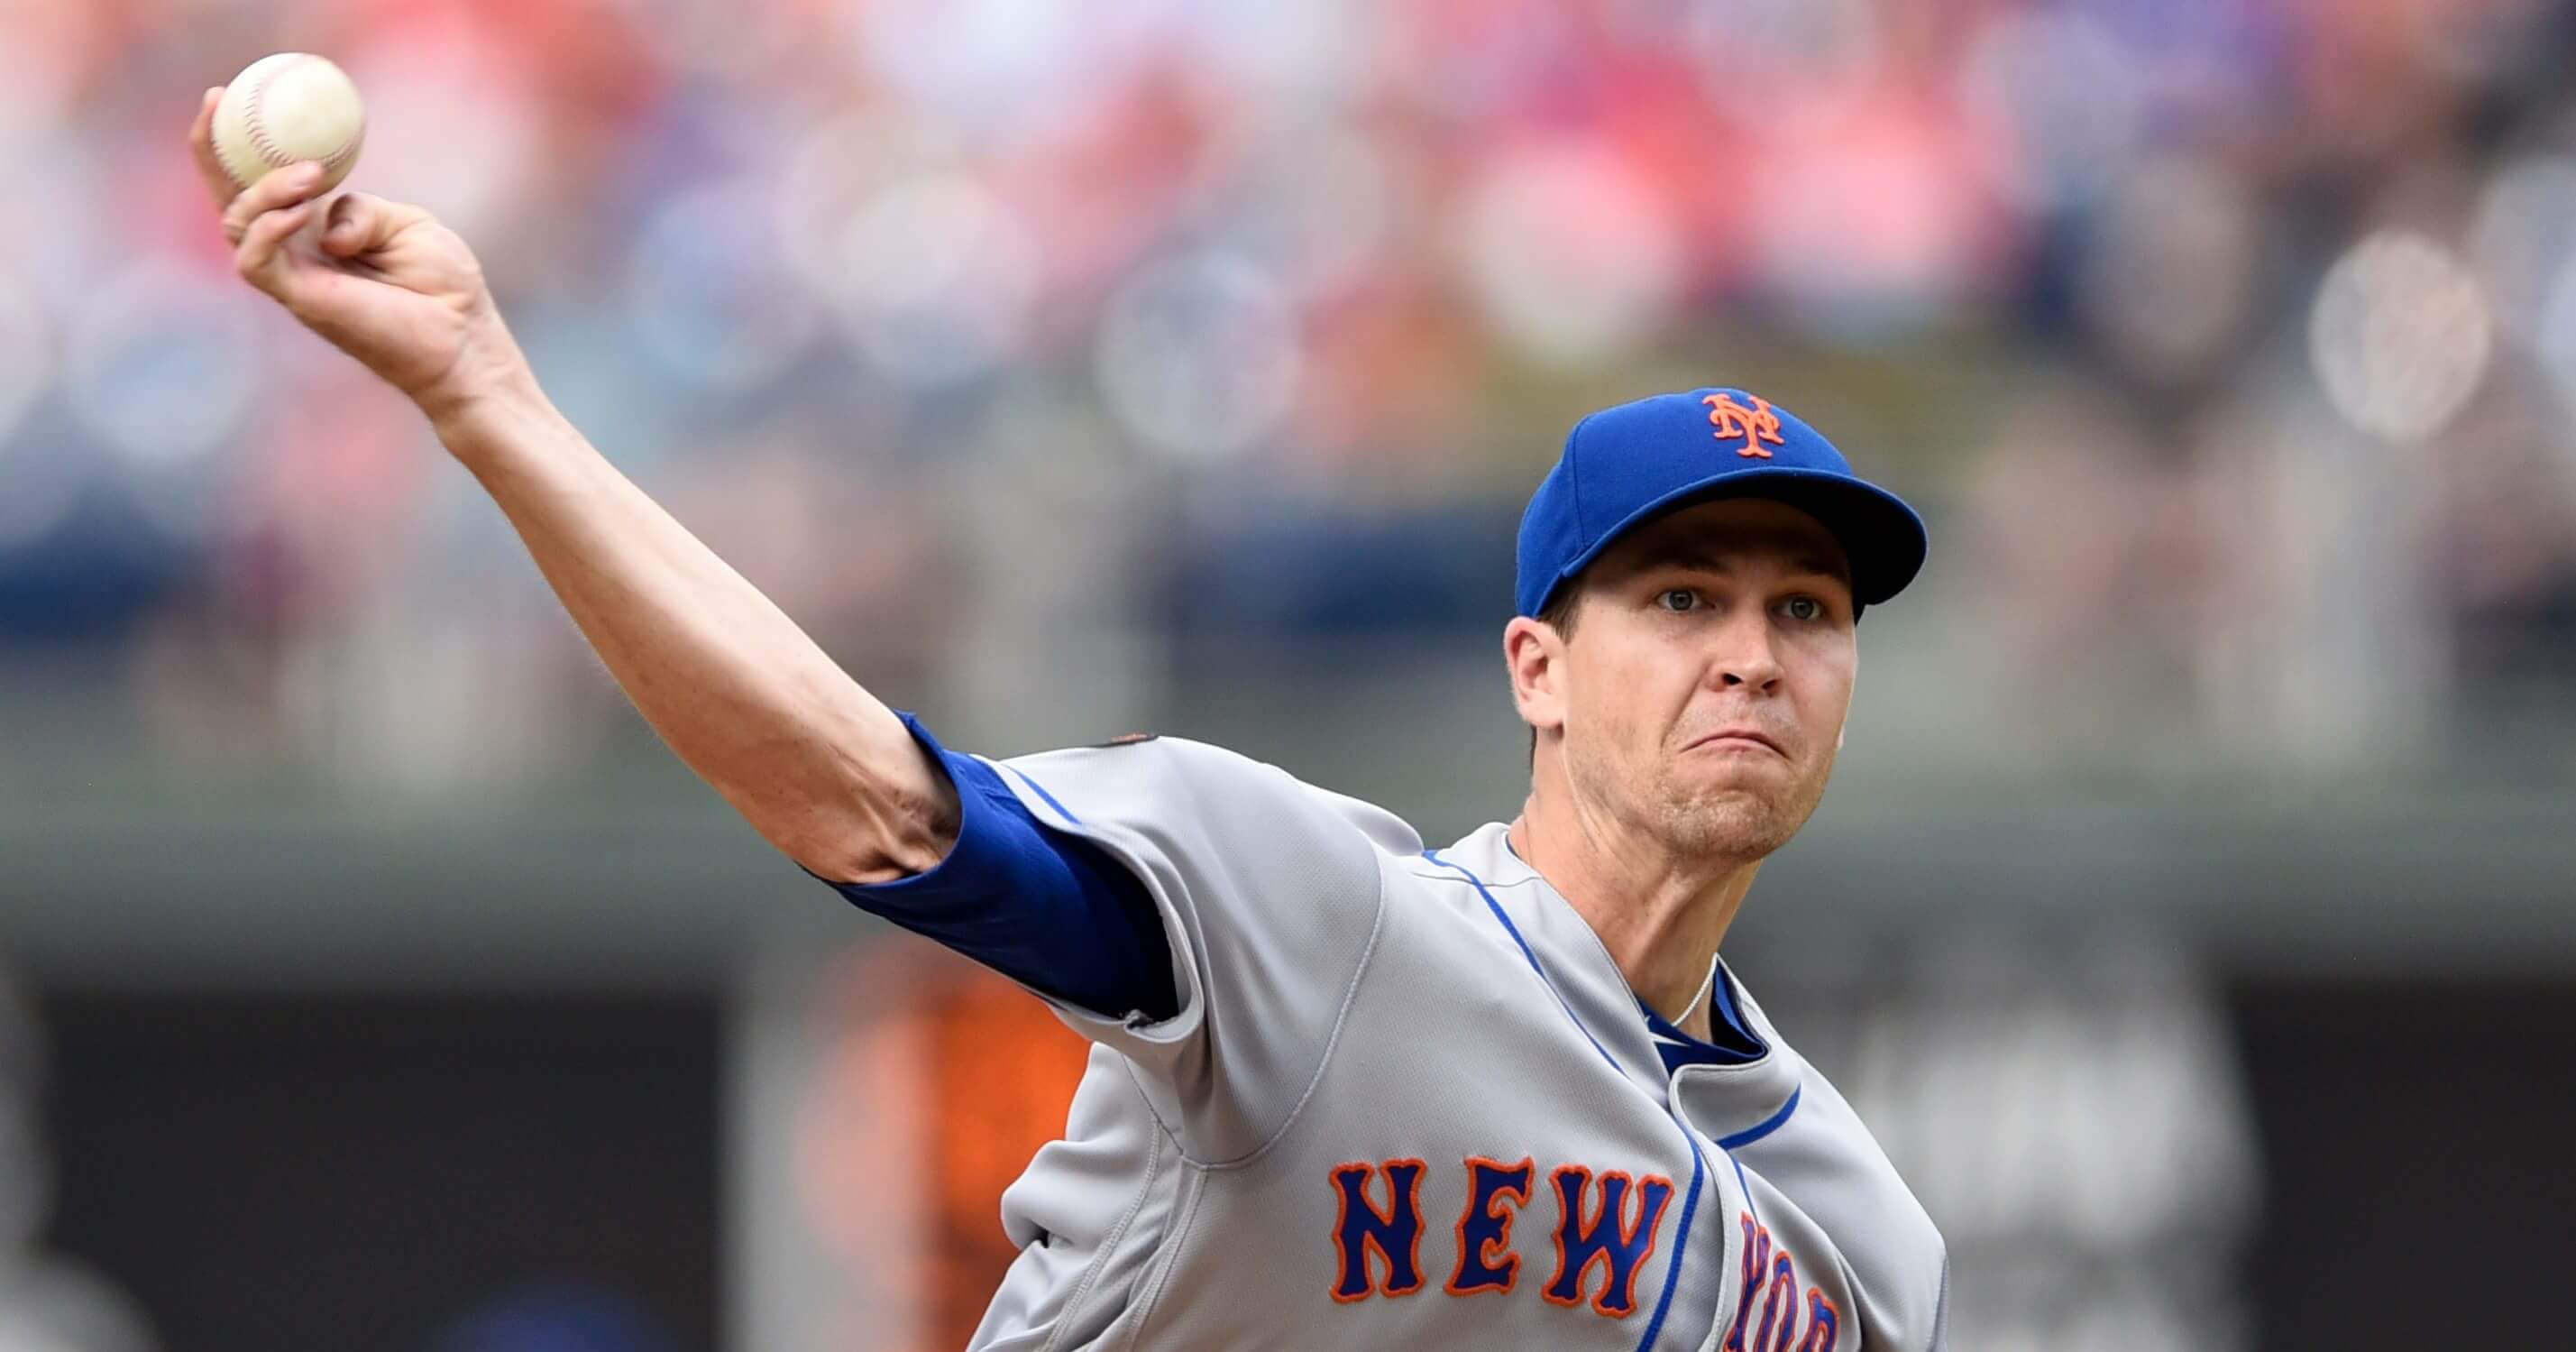 New York Mets starting pitcher Jacob deGrom throws during the first inning of a baseball game against the Philadelphia Phillies on Saturday in Philadelphia.